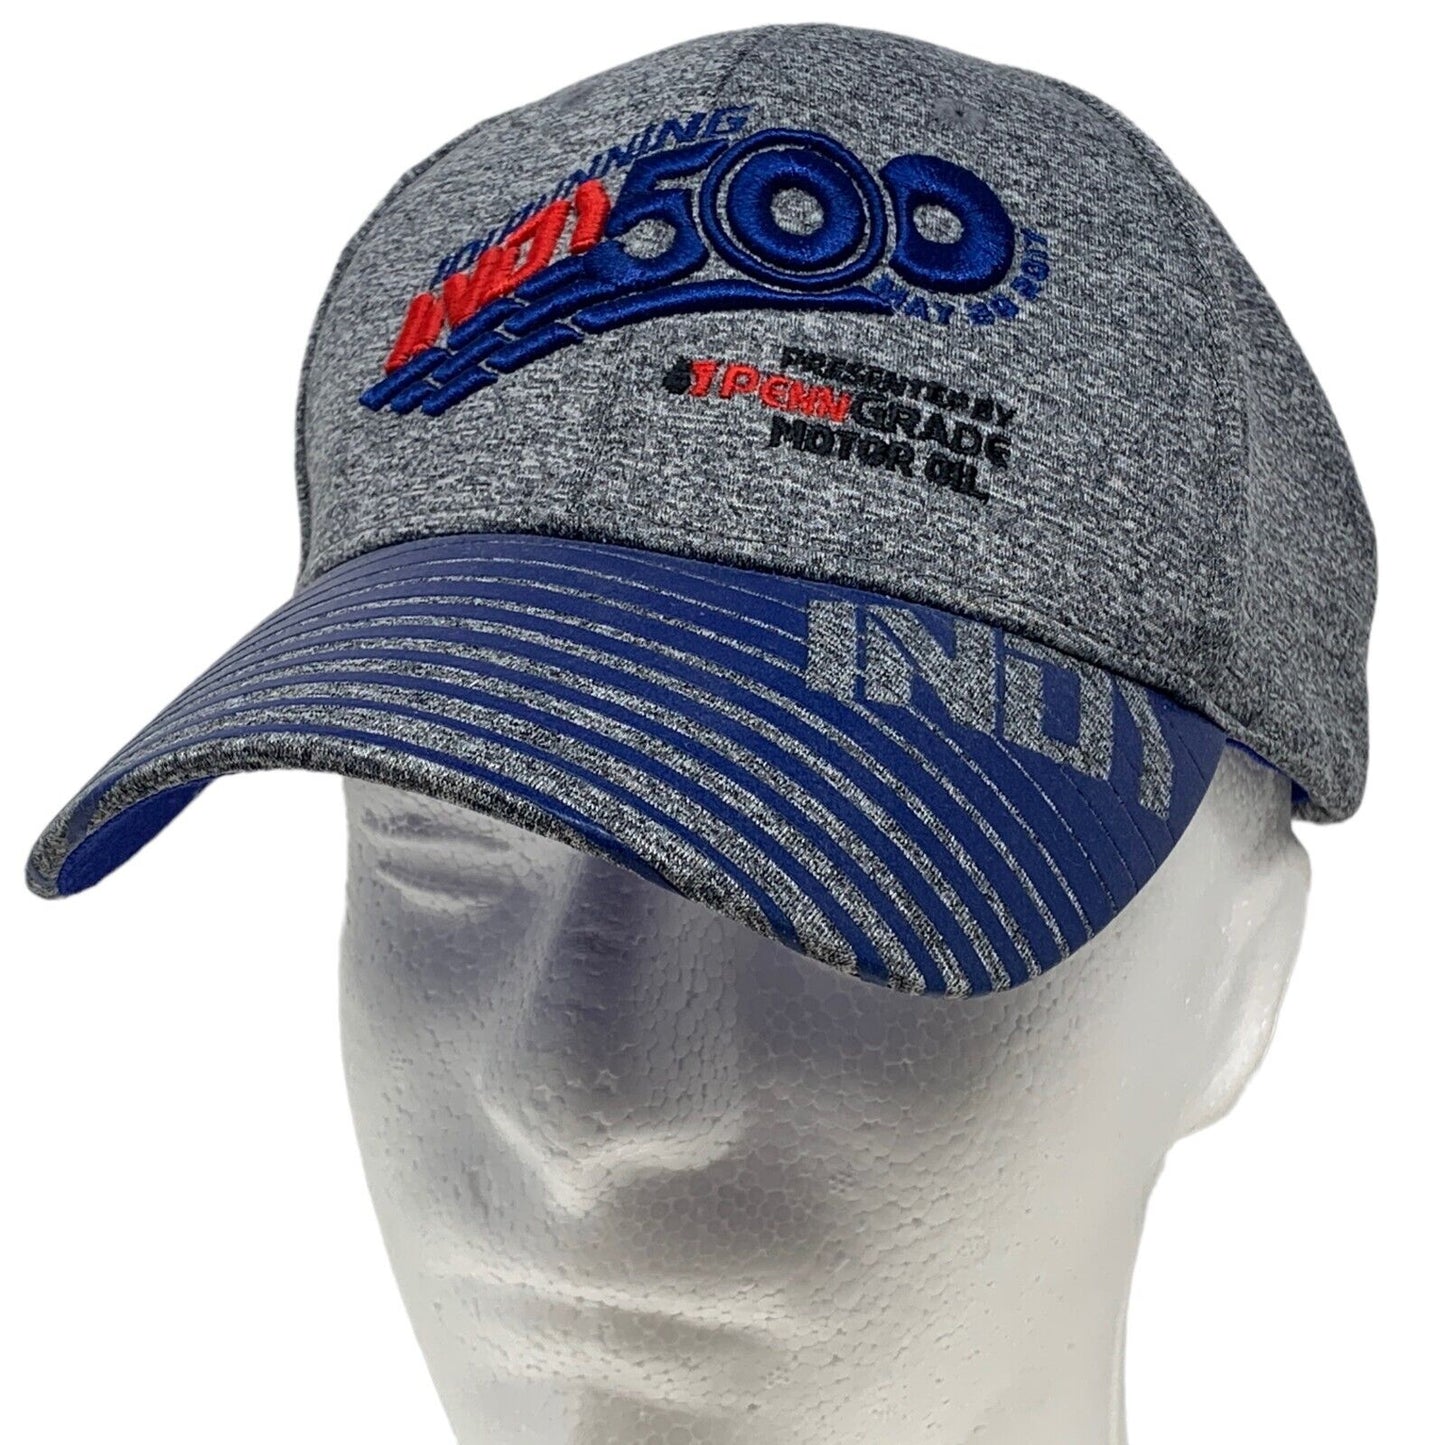 2017 Indianapolis Indy 500 Strapback Hat Numbered Limited Edition Baseball Cap